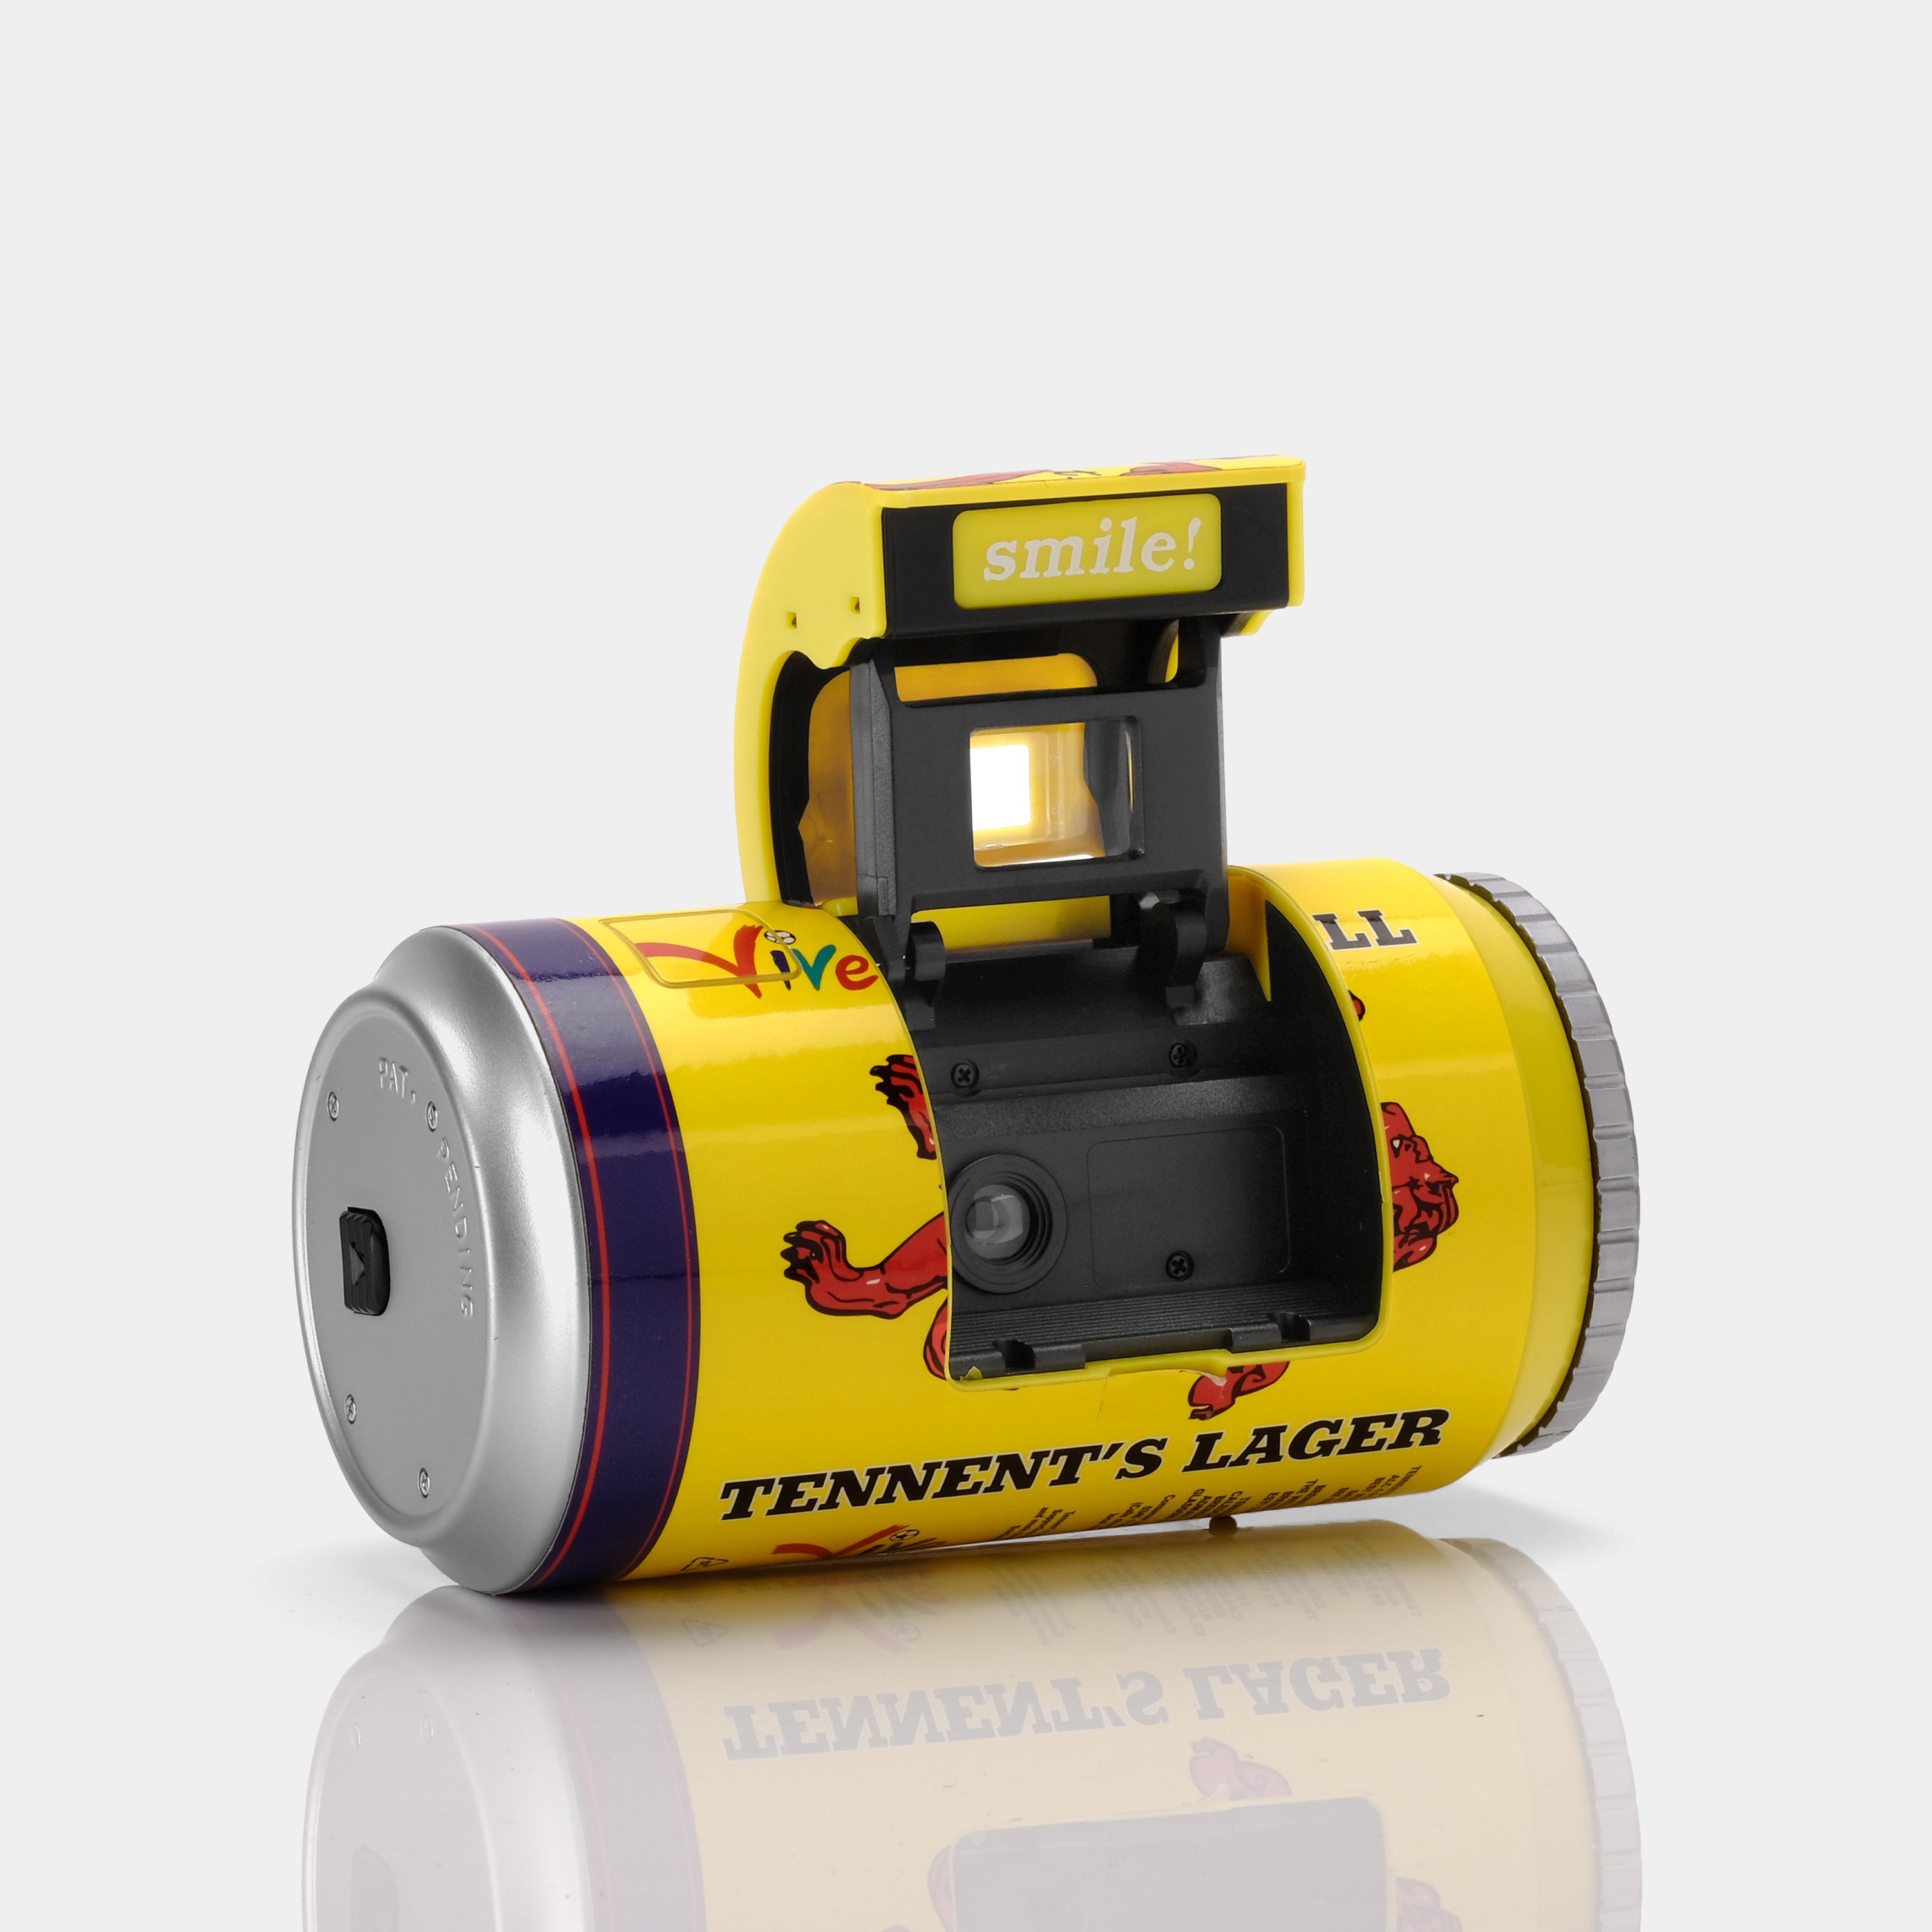 Tennent's Lager Camera In A Can "Vive Le Football" 1998 World Cup 35mm Film Camera